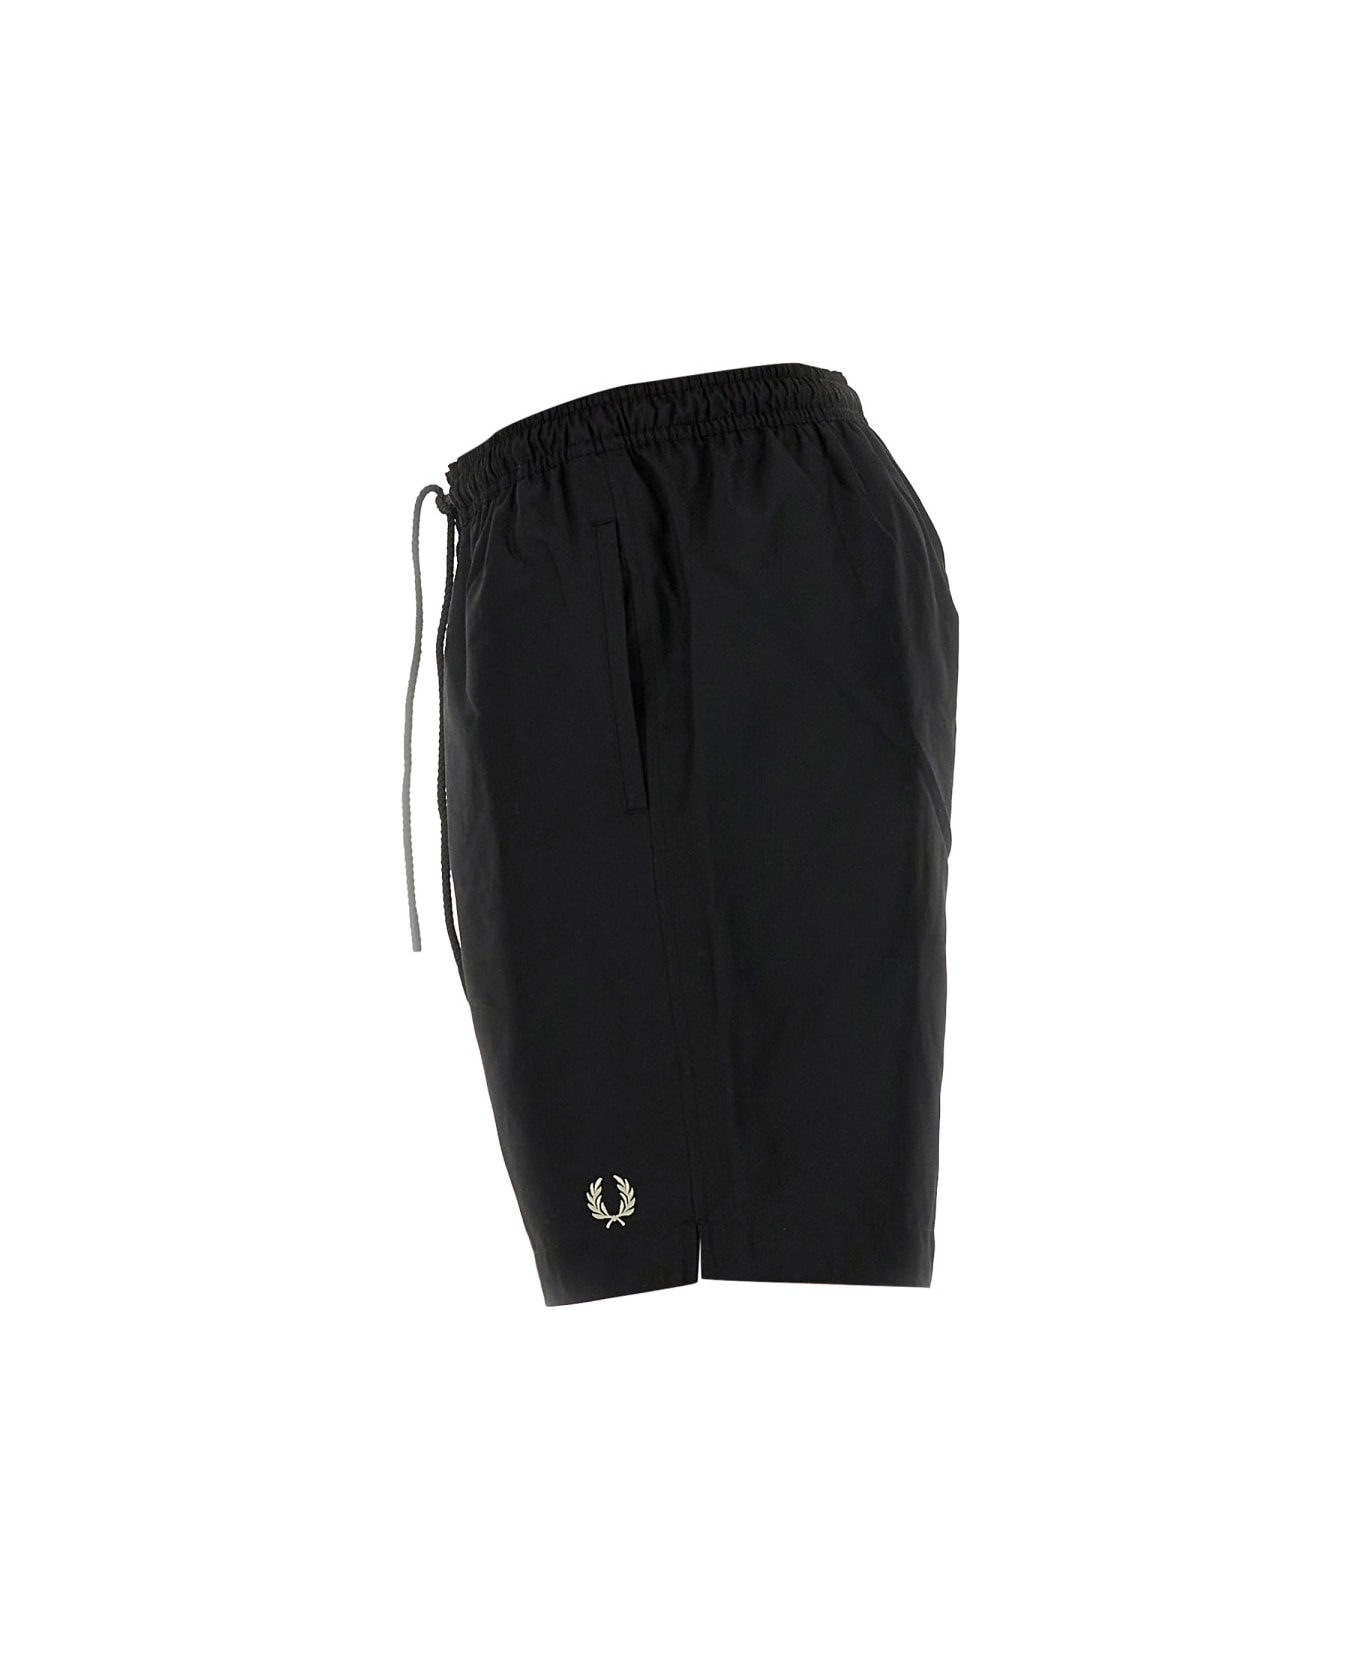 Fred Perry Swimsuit - BLACK 水着